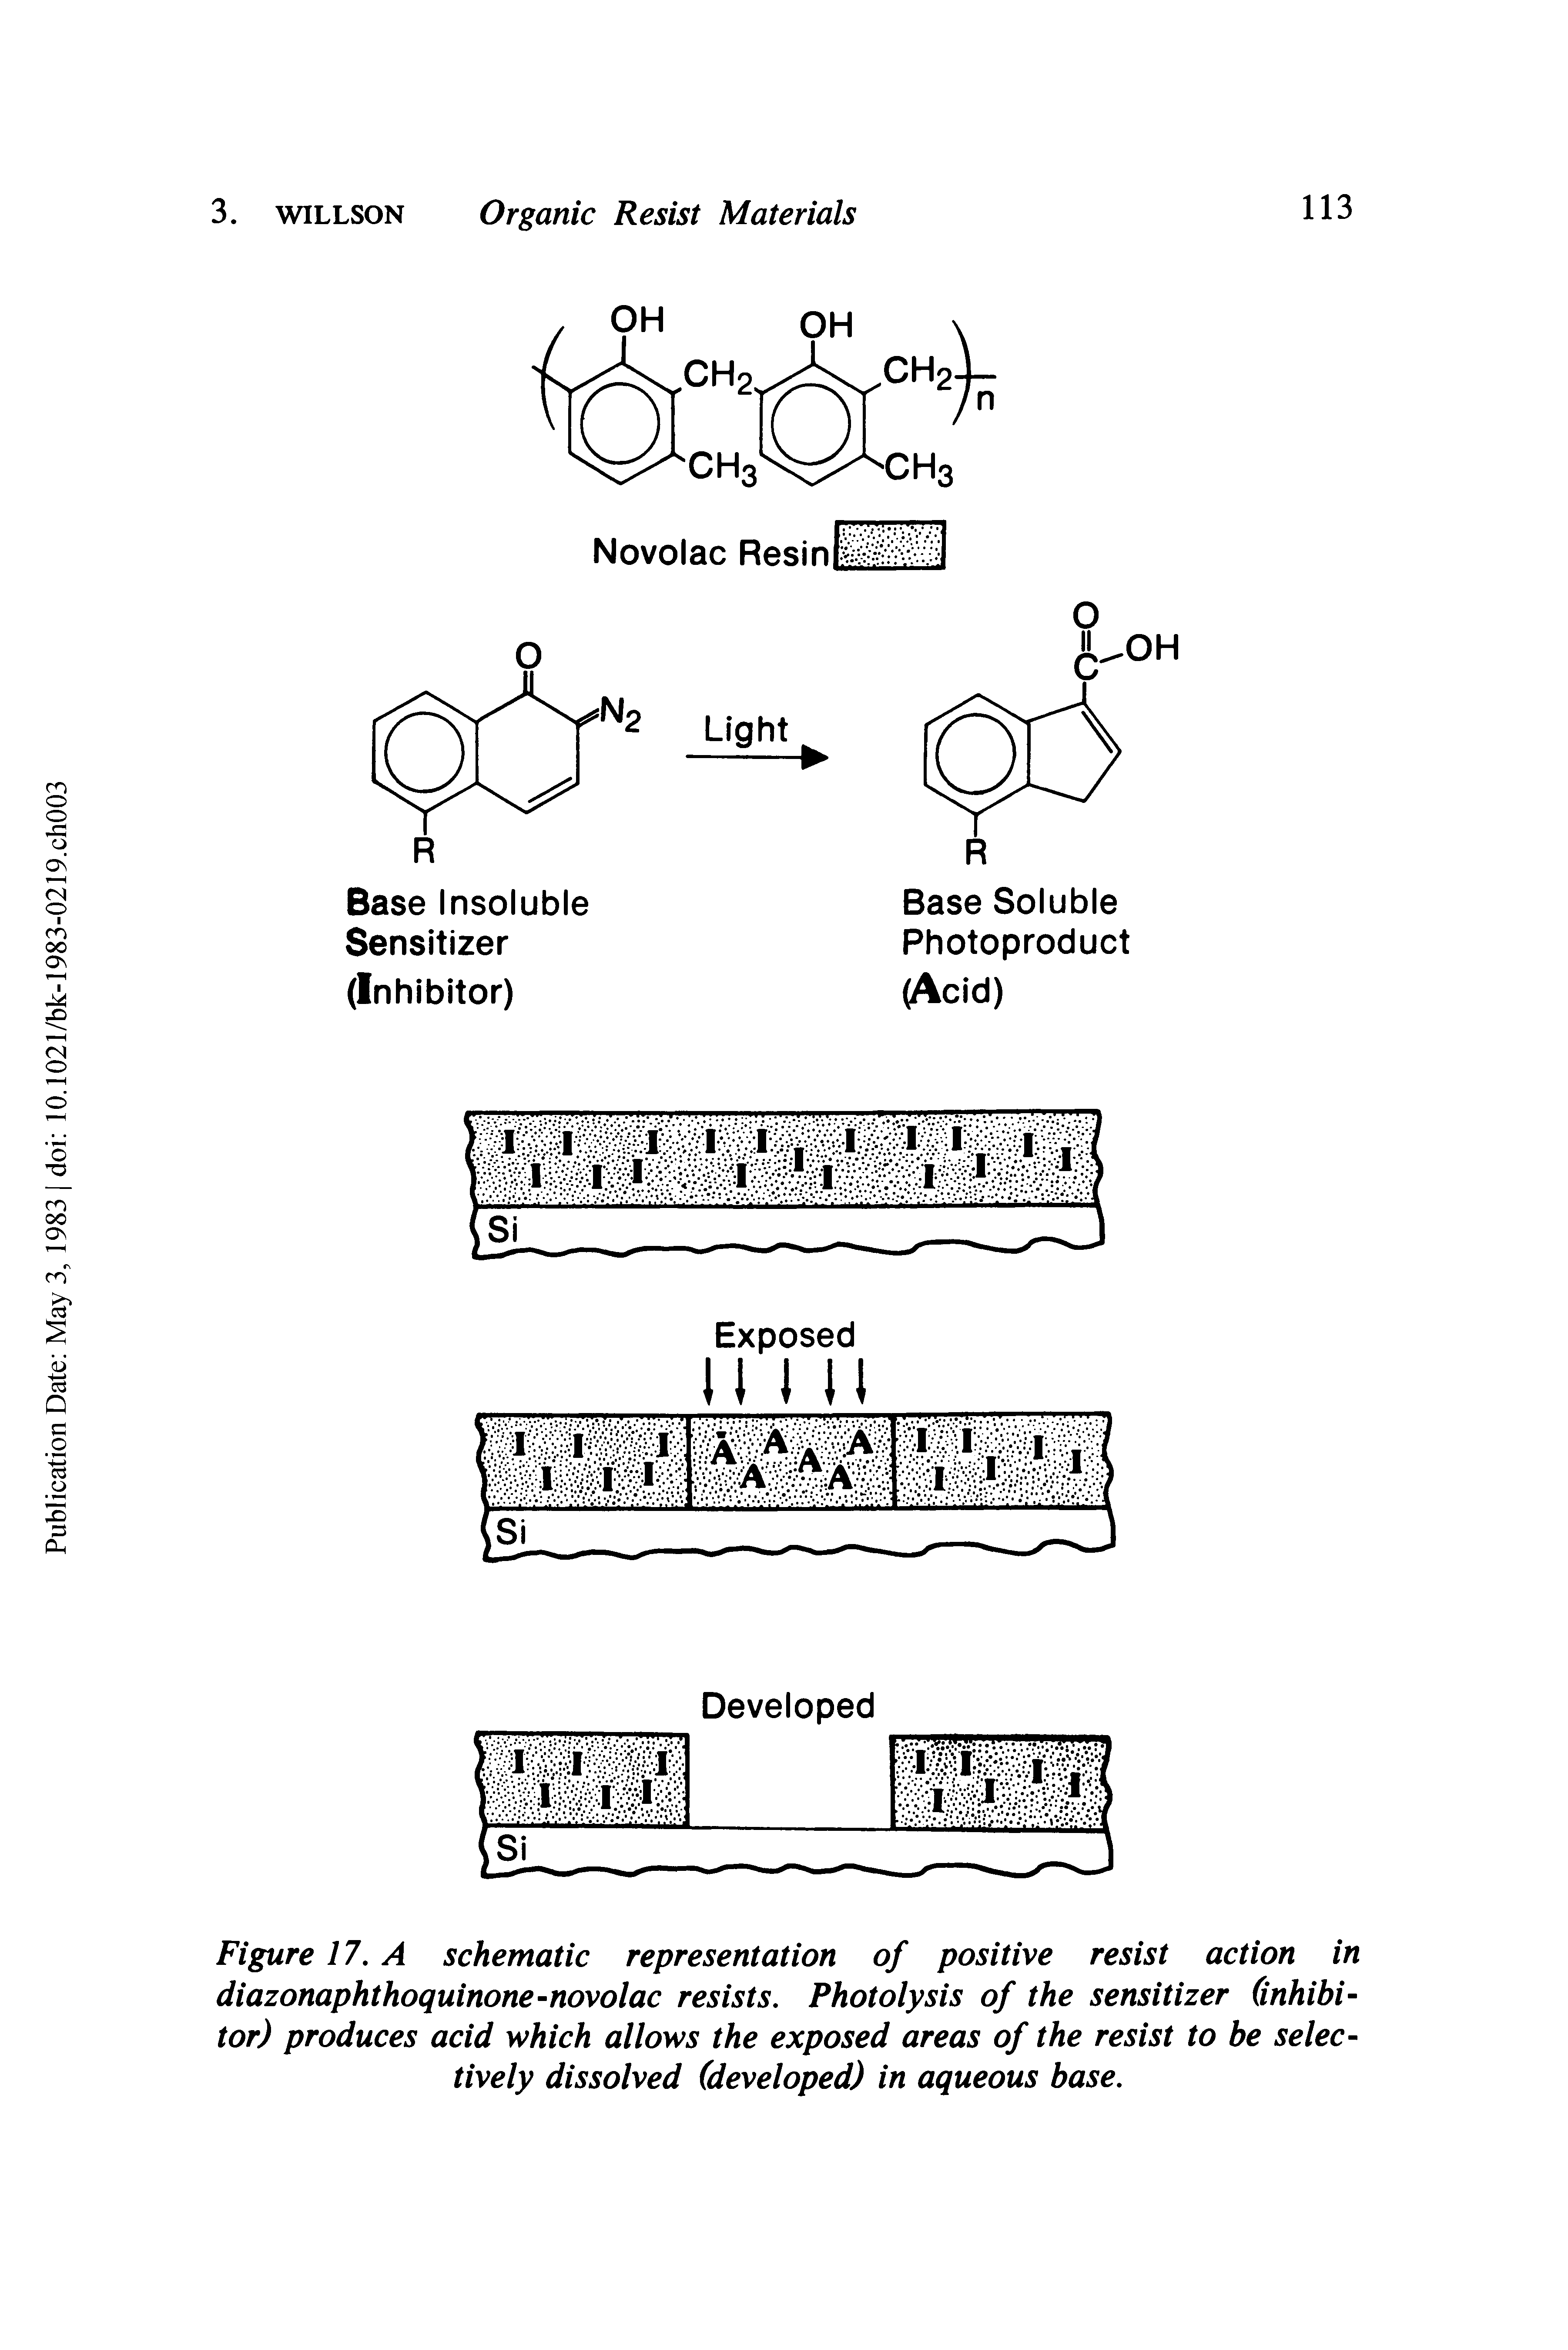 Figure 17. A schematic representation of positive resist action in diazonaphthoquinone-novolac resists. Photolysis of the sensitizer inhibitor) produces acid which allows the exposed areas of the resist to be selectively dissolved (developed) in aqueous base.